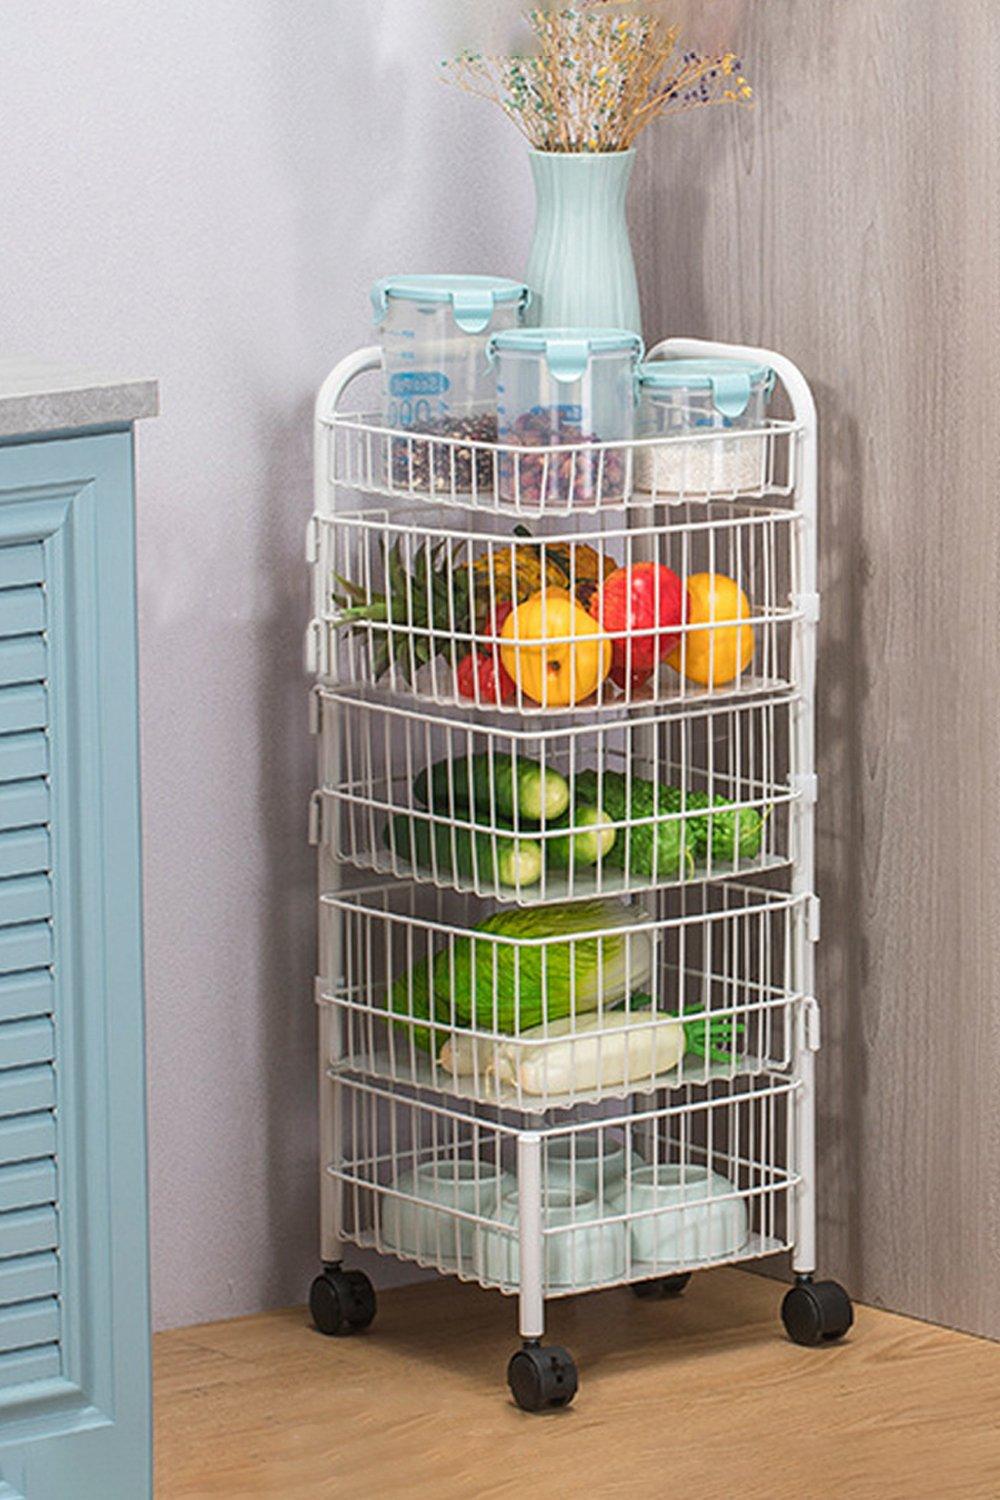 4-Layer Detachable Rotating Trolley Cart Scalable Spice Rack Vegetable Fruit Storage Basket Organize